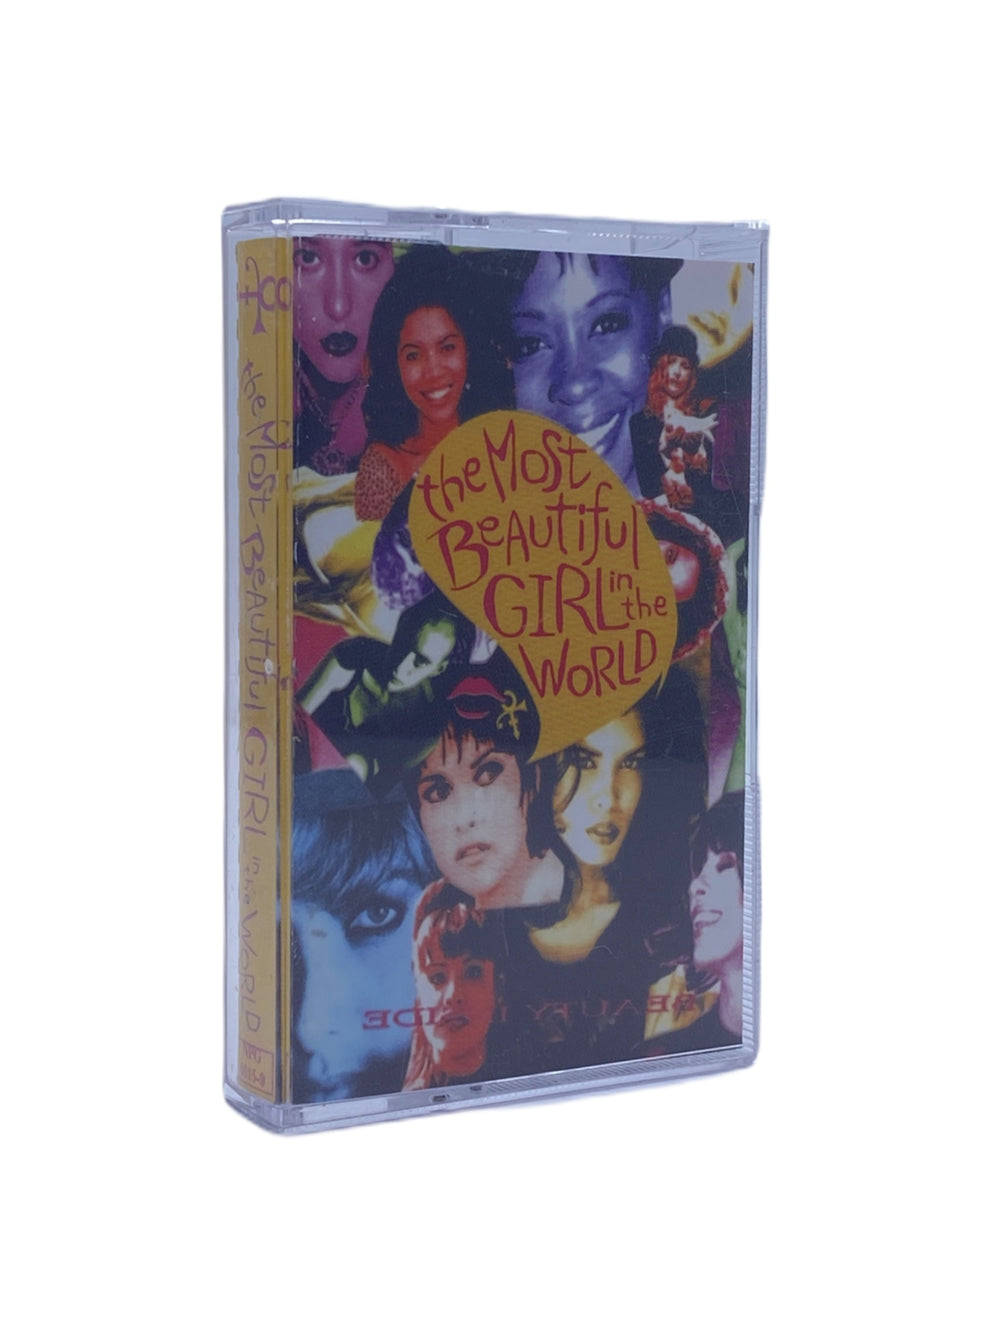 Prince The Most Beautiful Girl In The World 1994 Original Cassette Tape Cassingle SMS